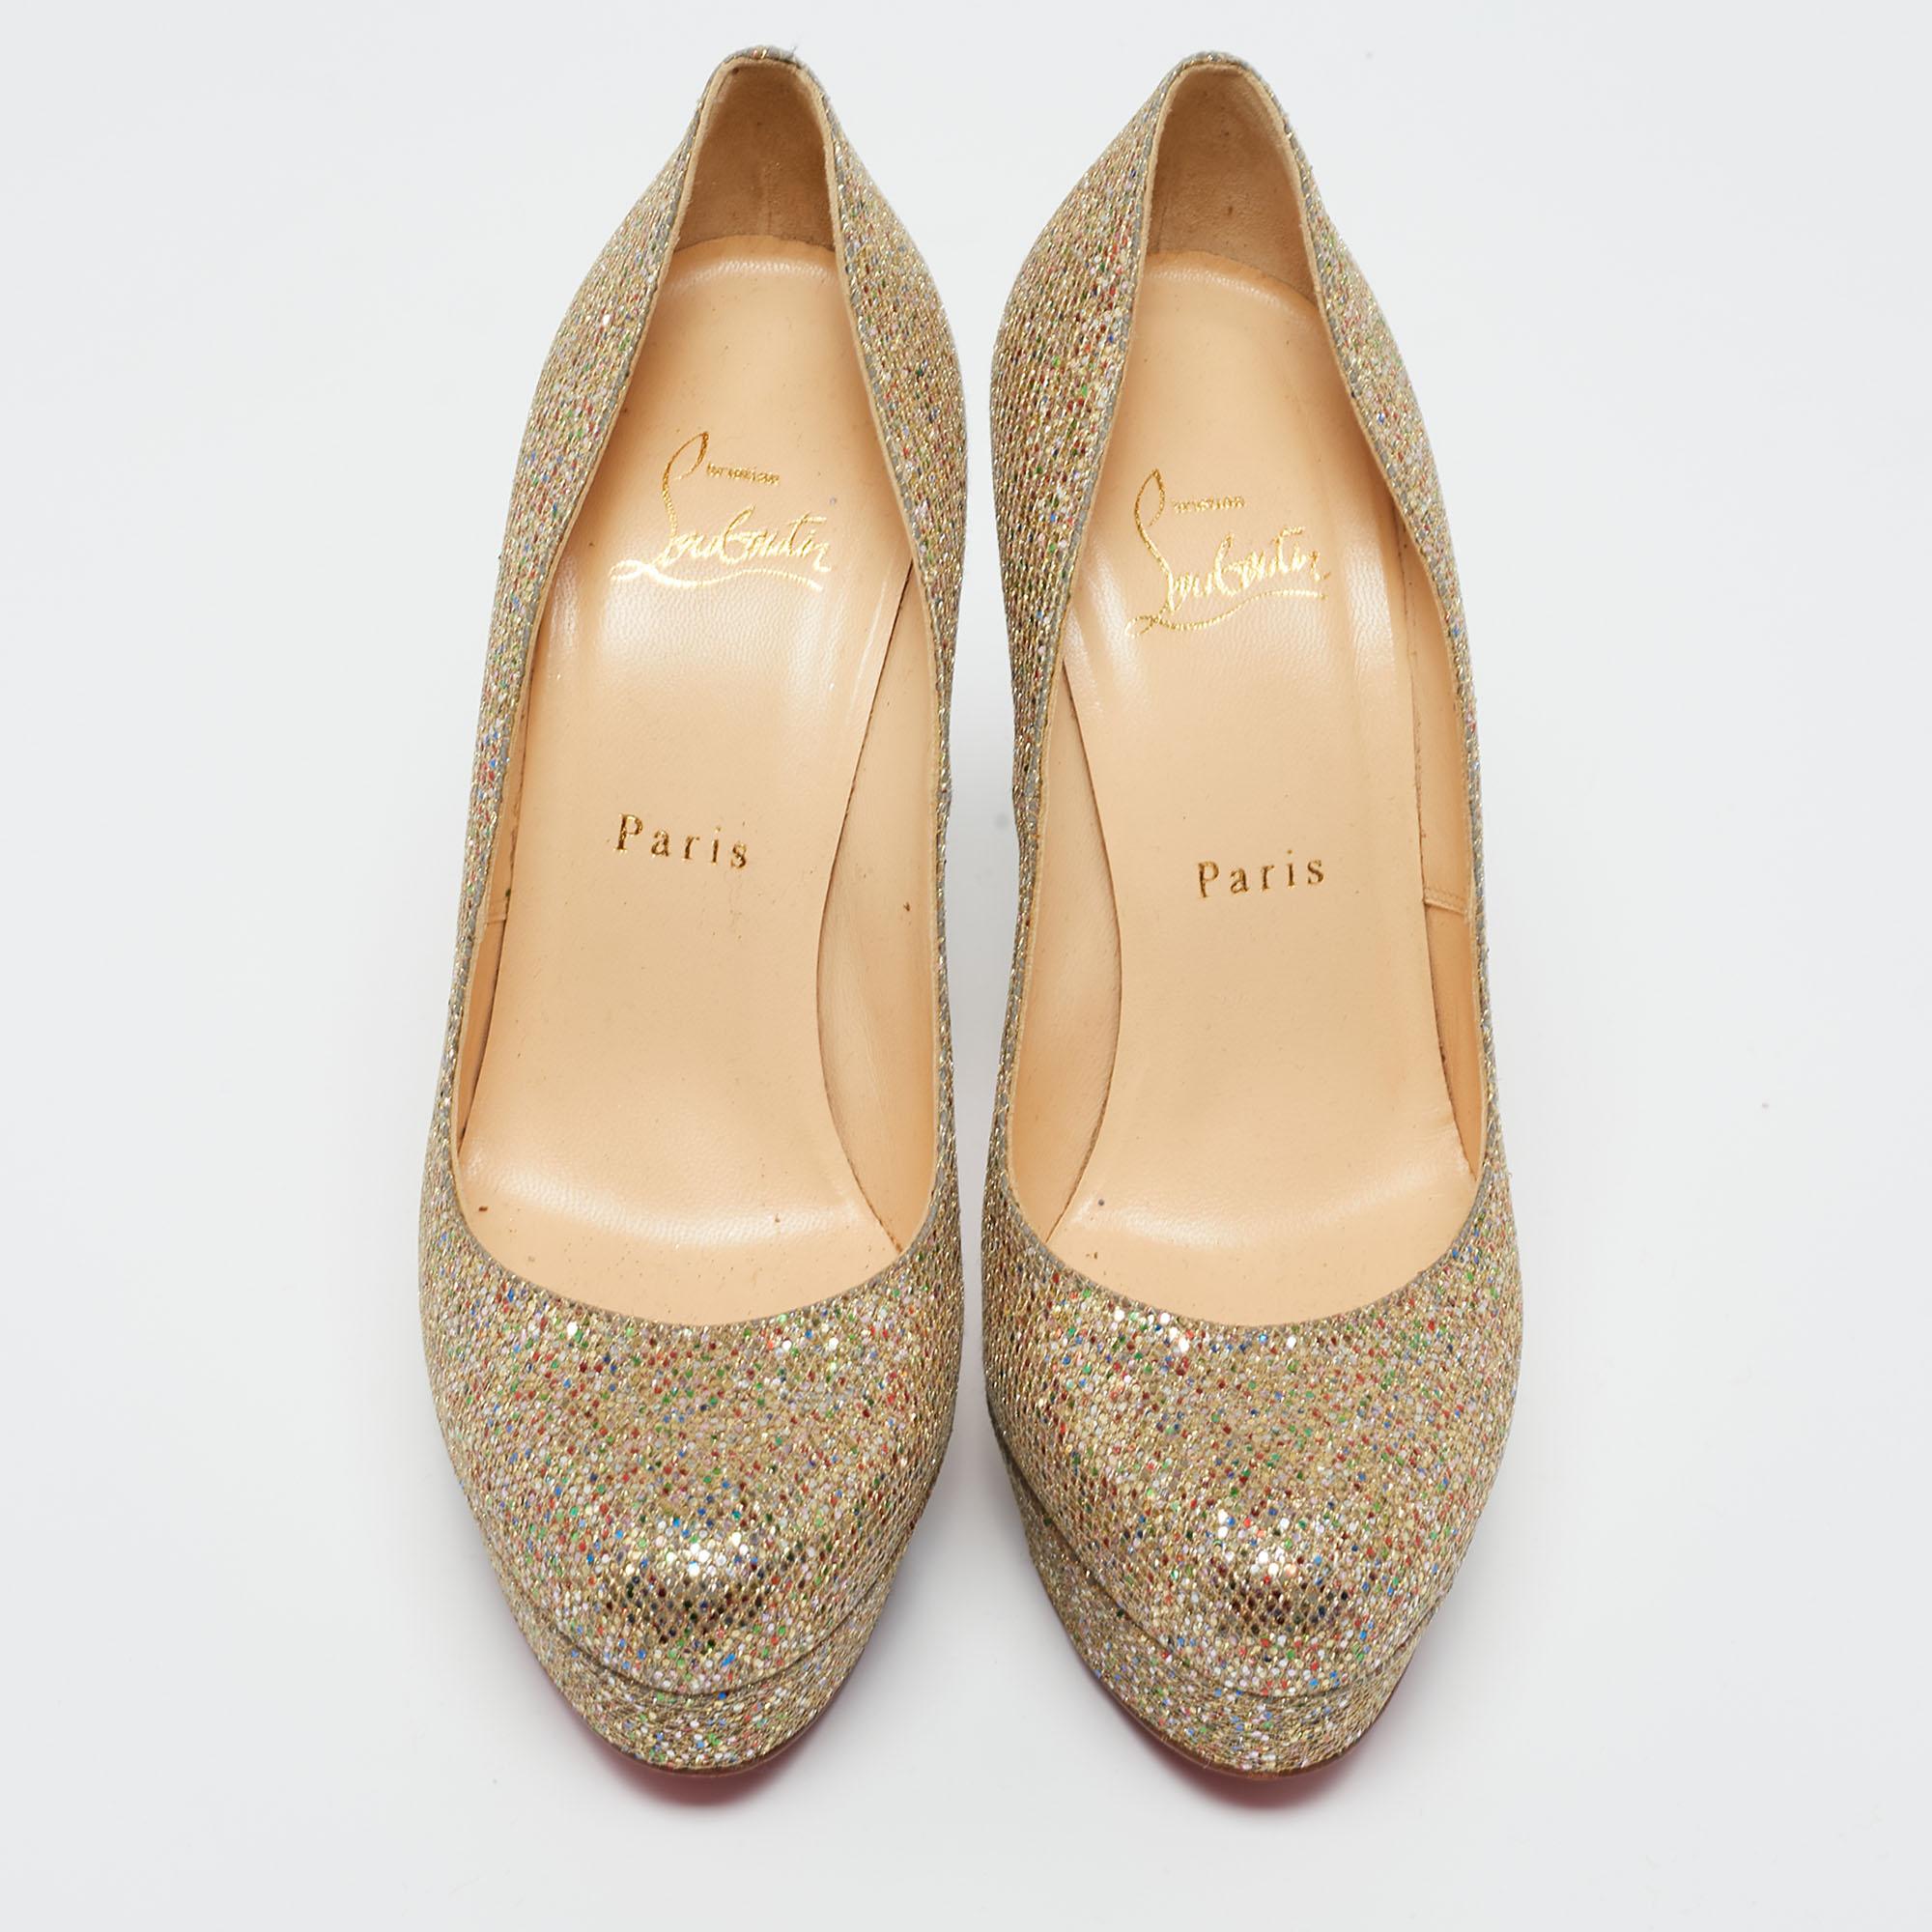 Feel glamorous every time you slip into this glitzy pair by Christian Louboutin. Covered in gold glitter and balanced on platforms and 12.5 cm heels, these pumps will be a winner with all your well-tailored outfits. They are finished with the